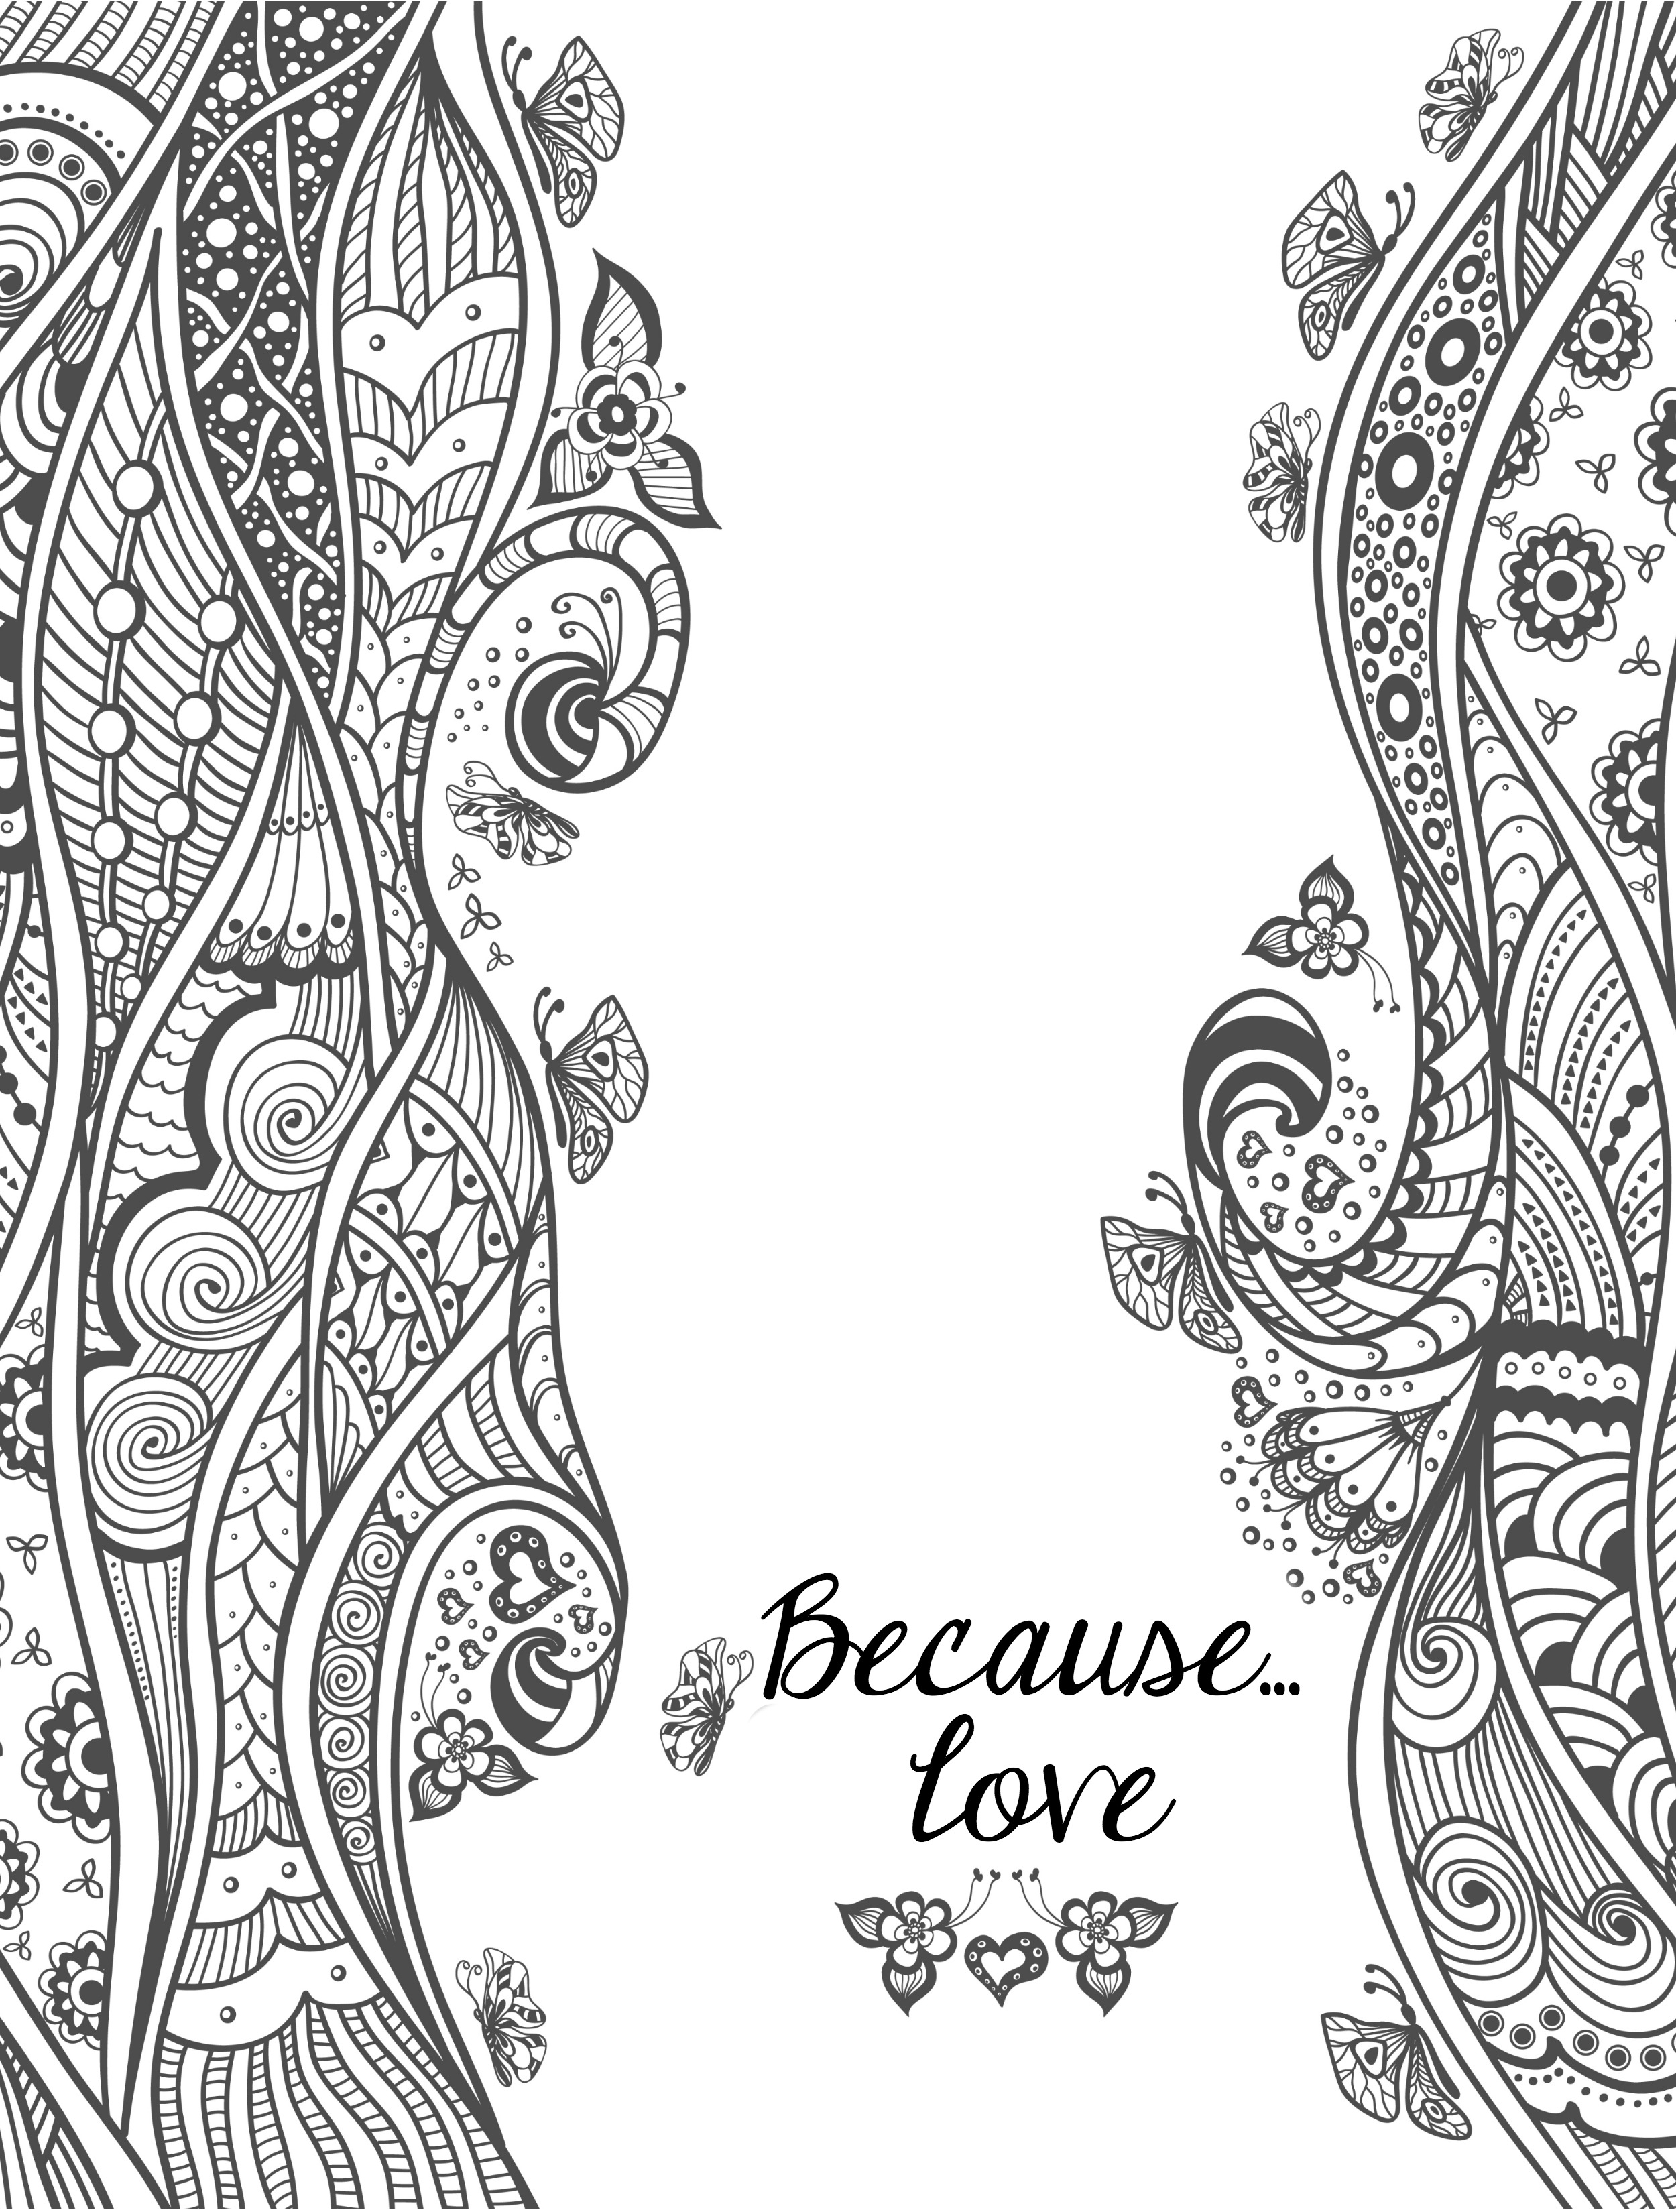 20 Free Printable Valentines Adult Coloring Pages - Nerdy Mamma - Free Printable Coloring Pages For Adults